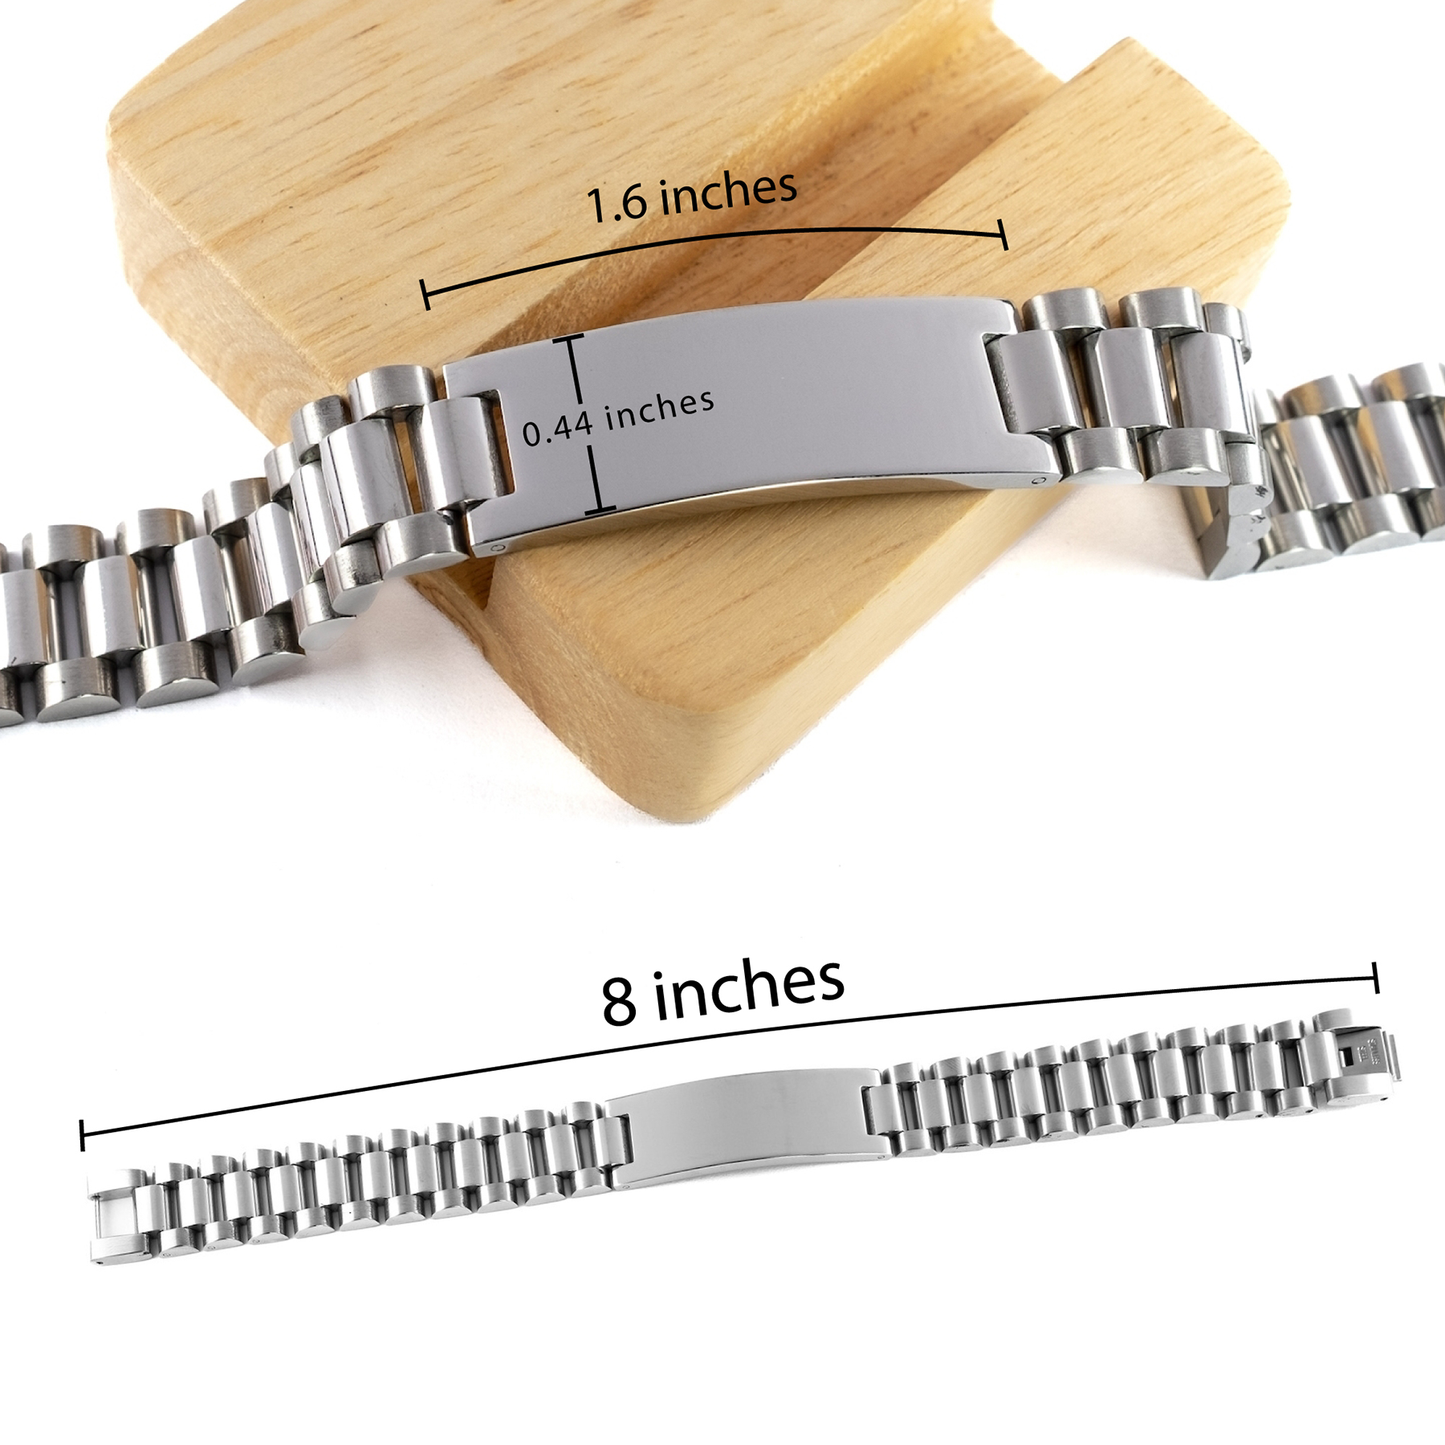 Christian Pop-in-law Gifts, Let all that you do be done in love, Bible Verse Scripture Ladder Stainless Steel Bracelet, Baptism Confirmation Gifts for Pop-in-law